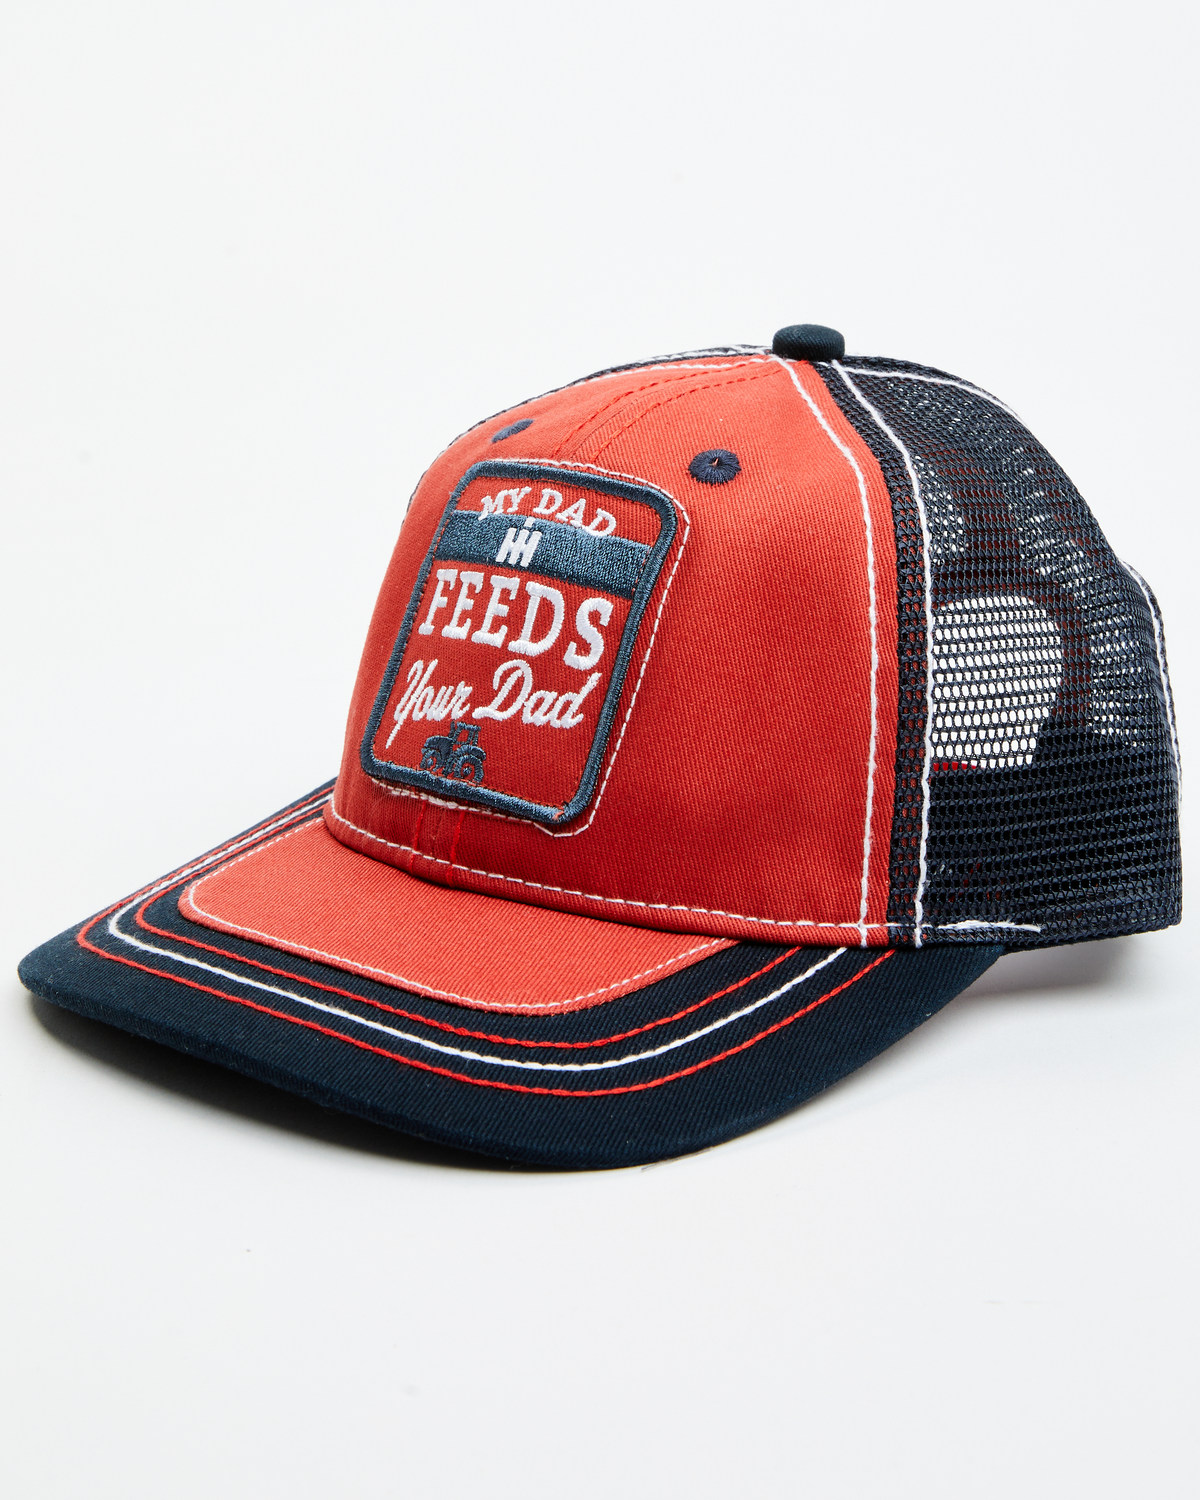 Case IH Toddler Boys' My Dad Feeds Your Dad Ball Cap